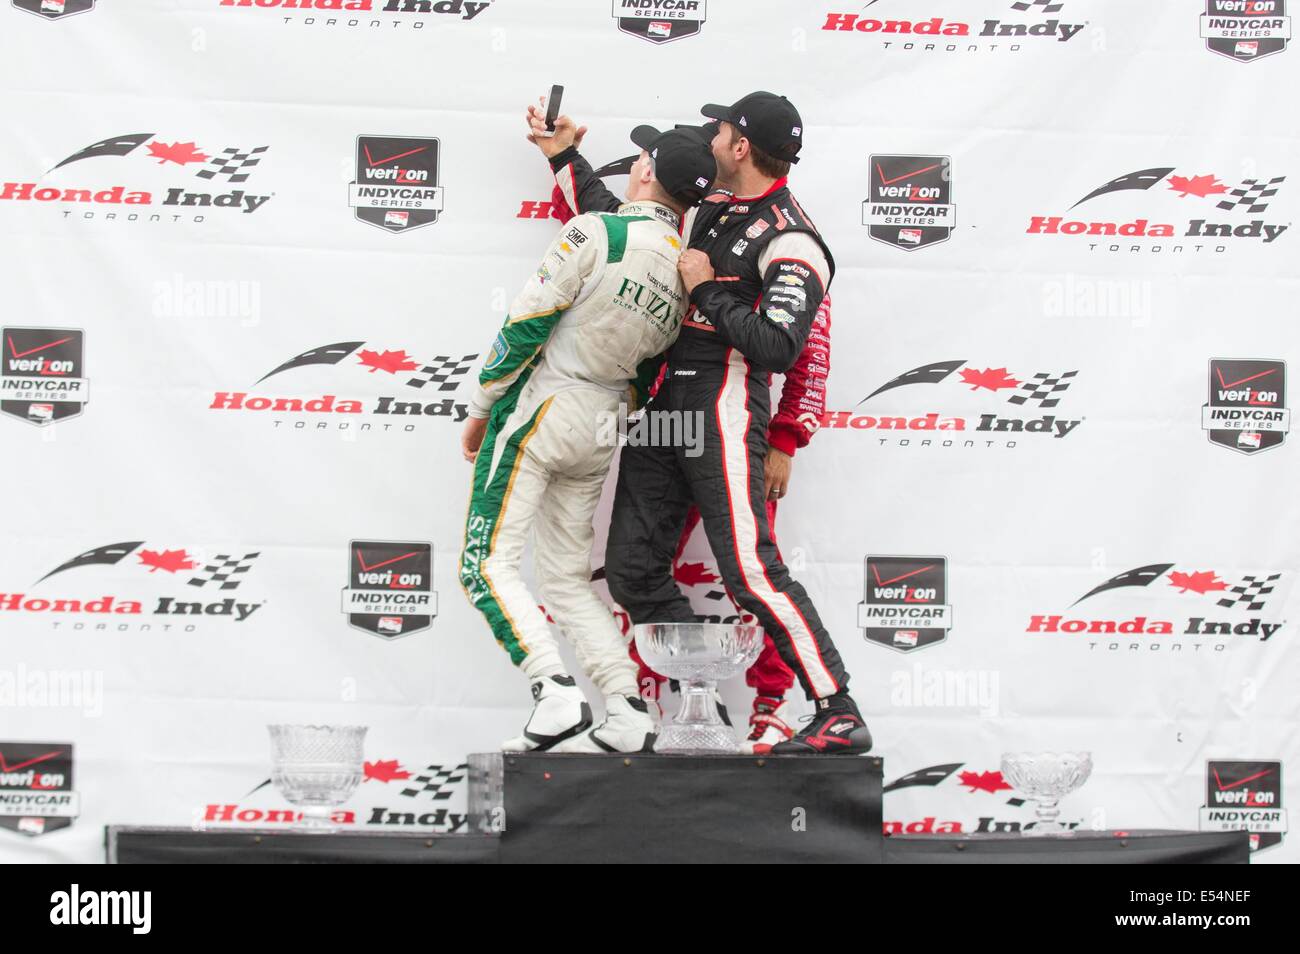 Toronto, Canada. 20th July, 2014. Ed Carpenter Racing's British driver Mike Conway (L) takes a selfie with Tony Kanaan (C) of Target Chip Ganassi Racing and Will Power of Team Penskecelebrates during the award ceremony of the race two of the 2014 Honda Indy Toronto of IndyCar Series race in Toronto, Canada, July 20, 2014. Ed Carpenter Racing's British driver Mike Conway won the race two title of the 2014 Honda Indy Toronto on Sunday. Credit:  Zou Zheng/Xinhua/Alamy Live News Stock Photo